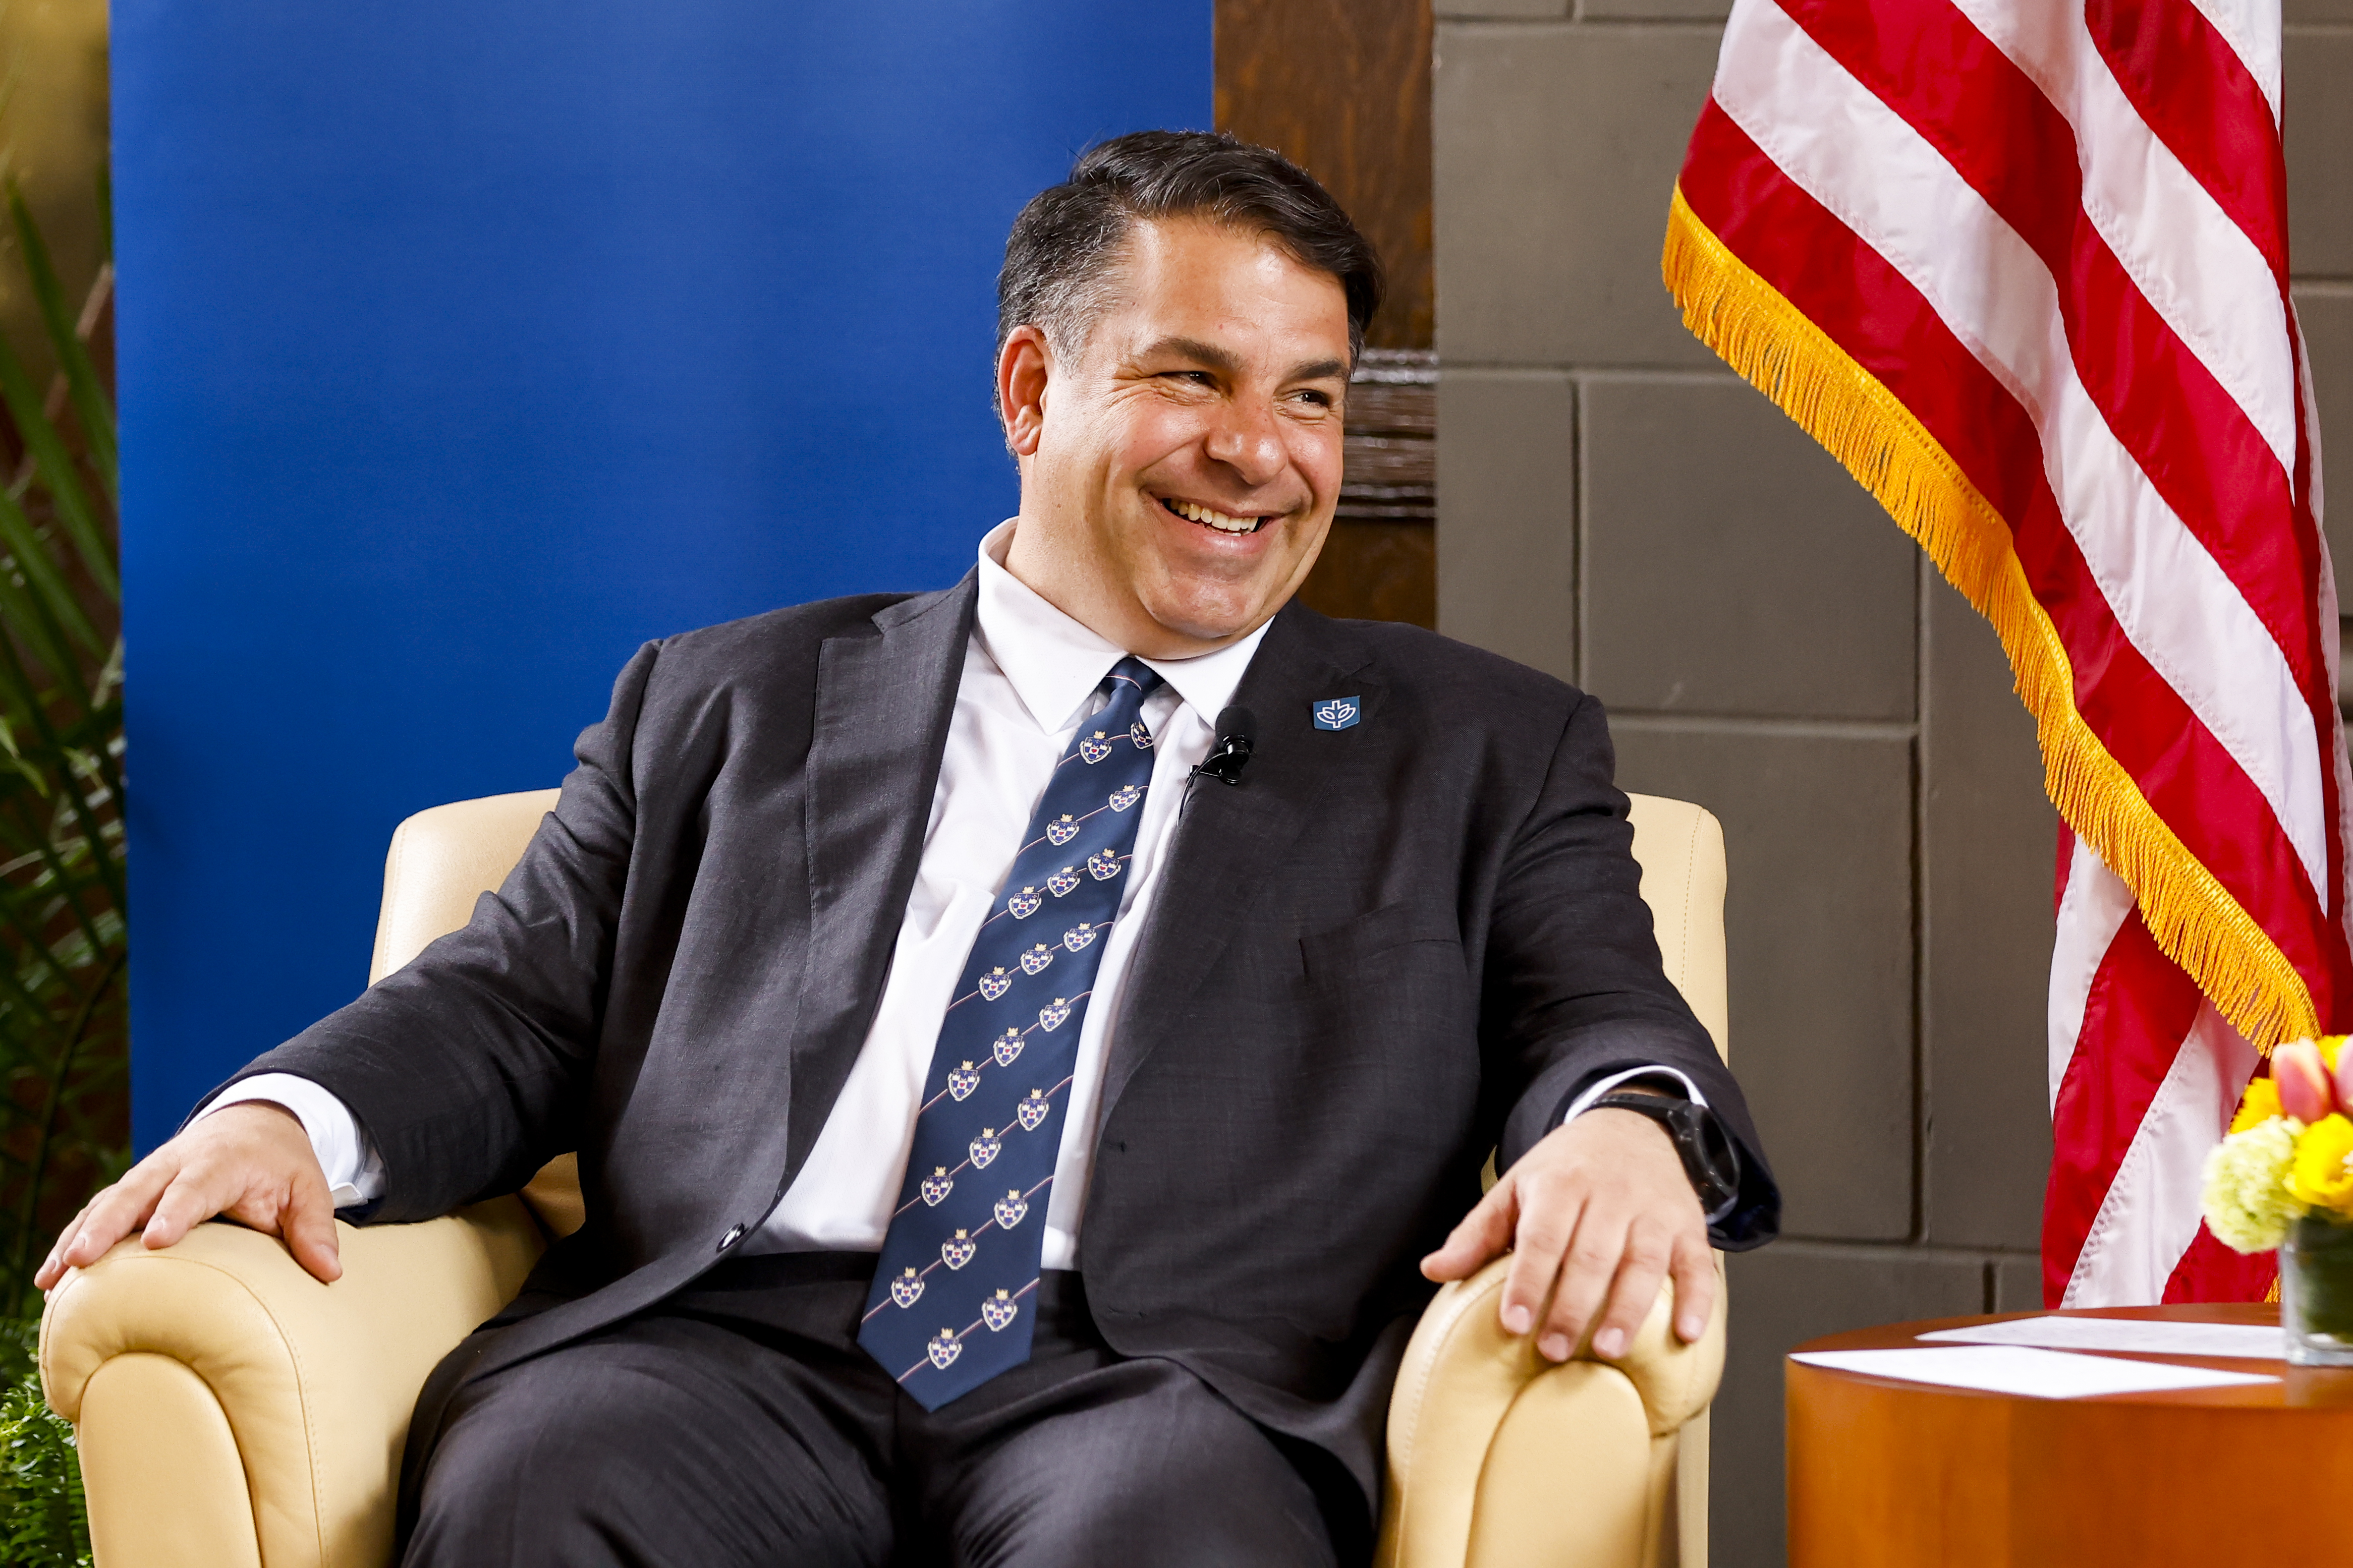 May 10, DePaul University announced Dr. Robert L. Manuel will serve as its 13th president.